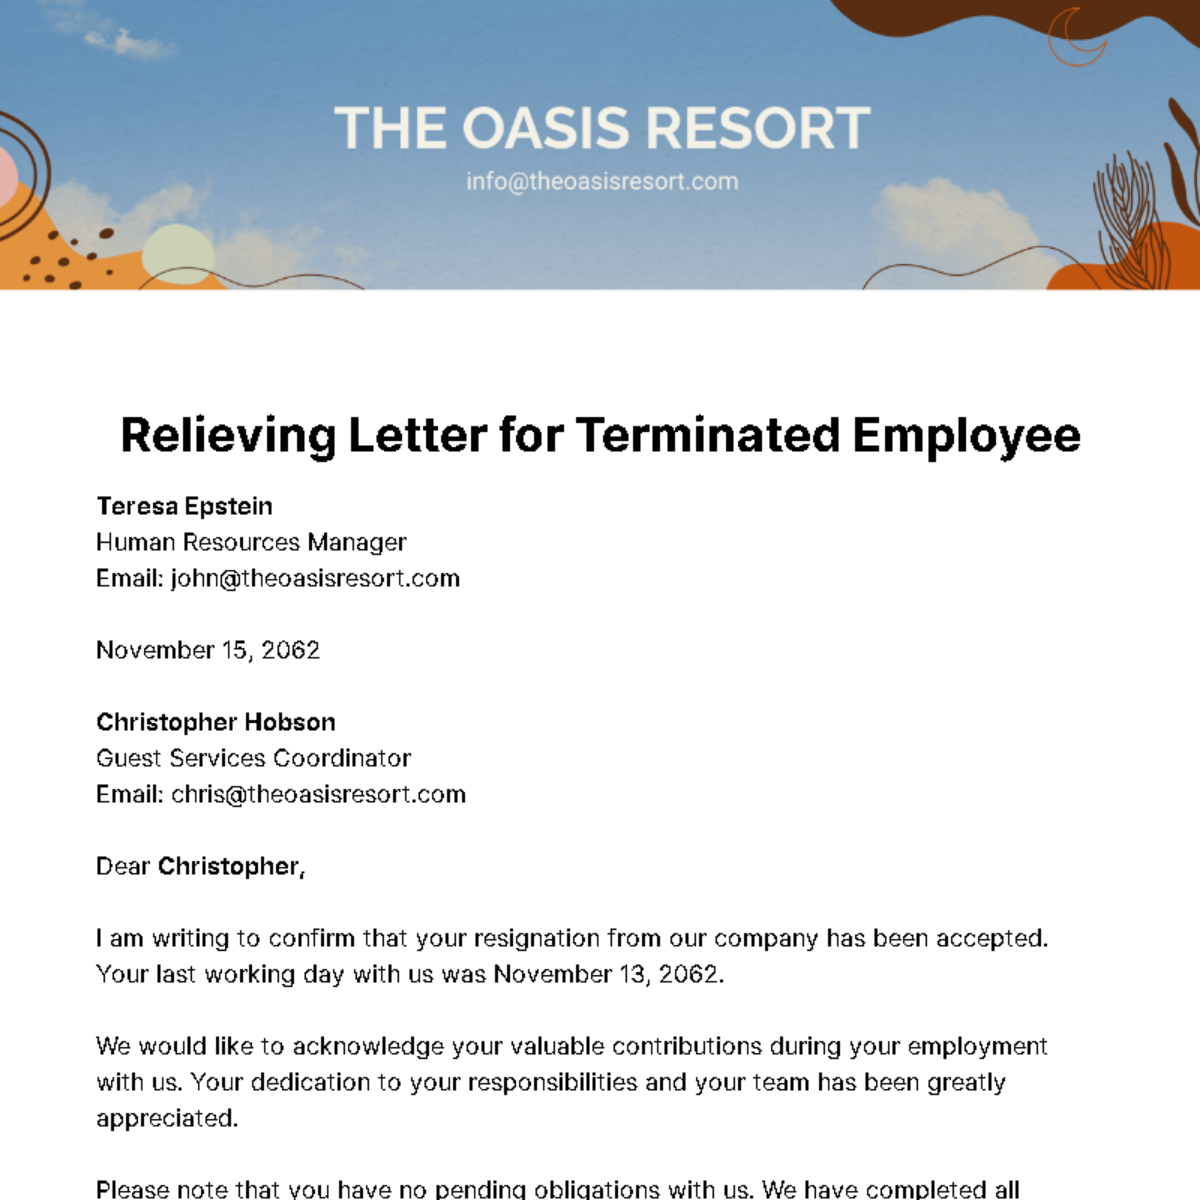 Relieving Letter for Terminated Employee Template